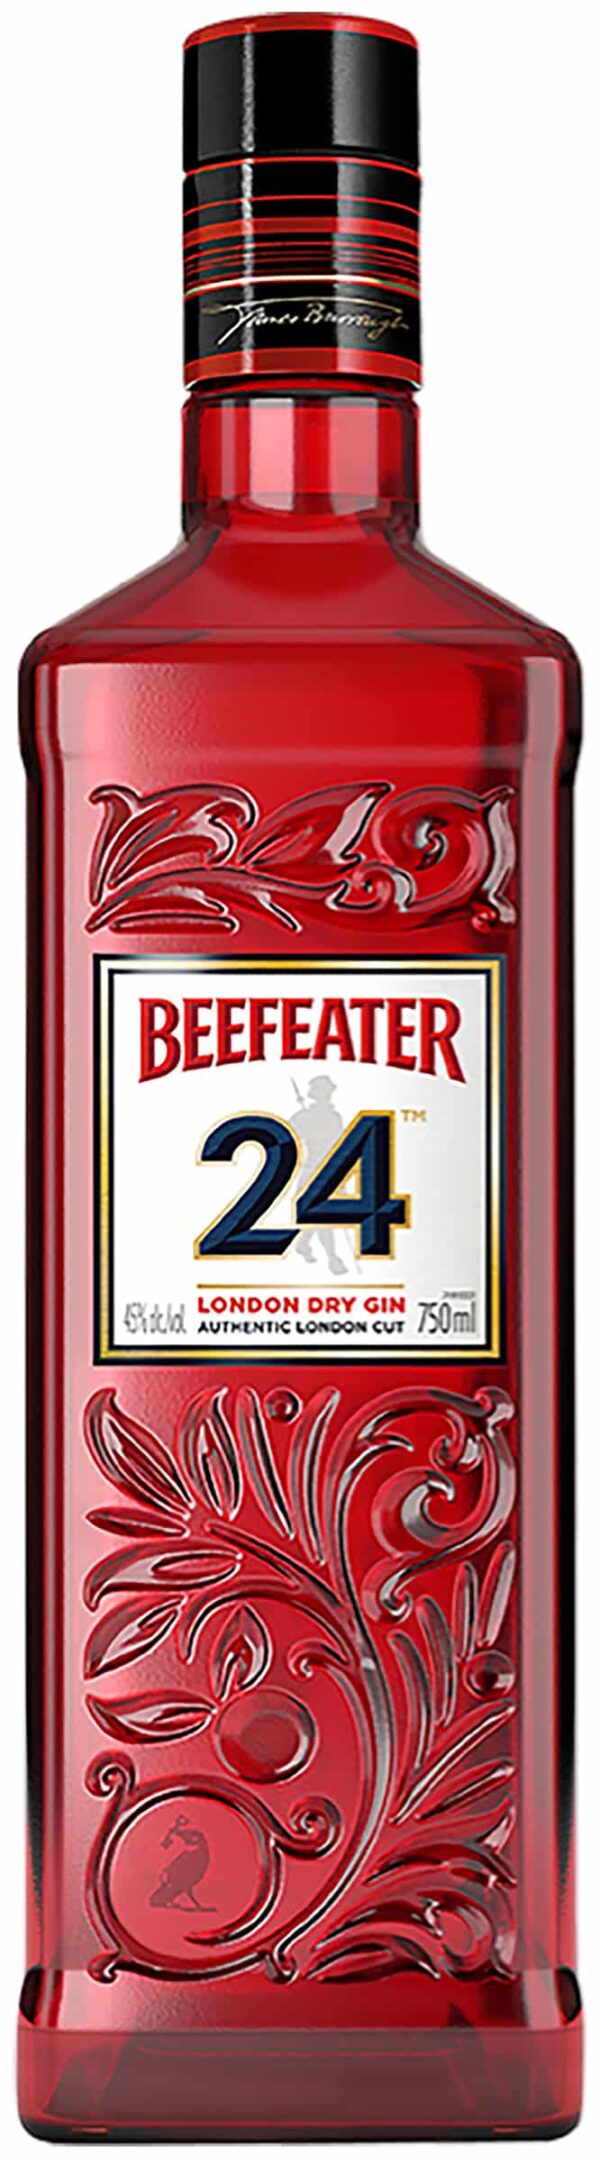 Beefeater24